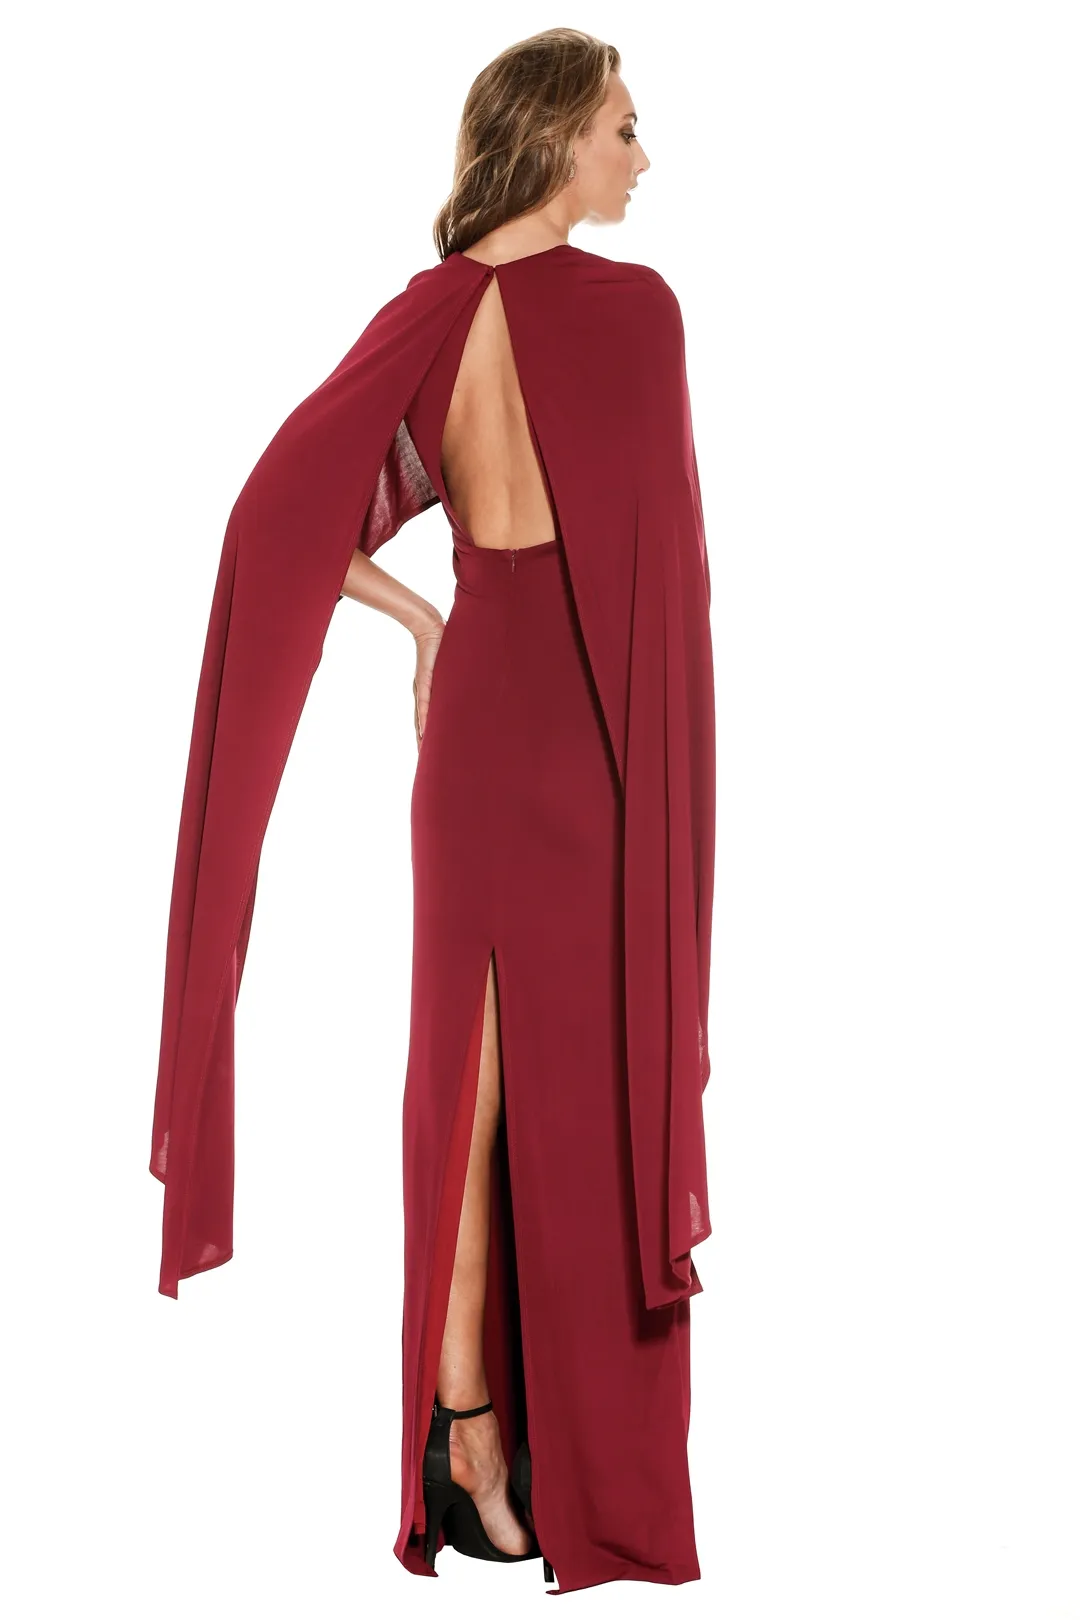 Rent the Cyra Deep V Cape Gown for a red carpet look